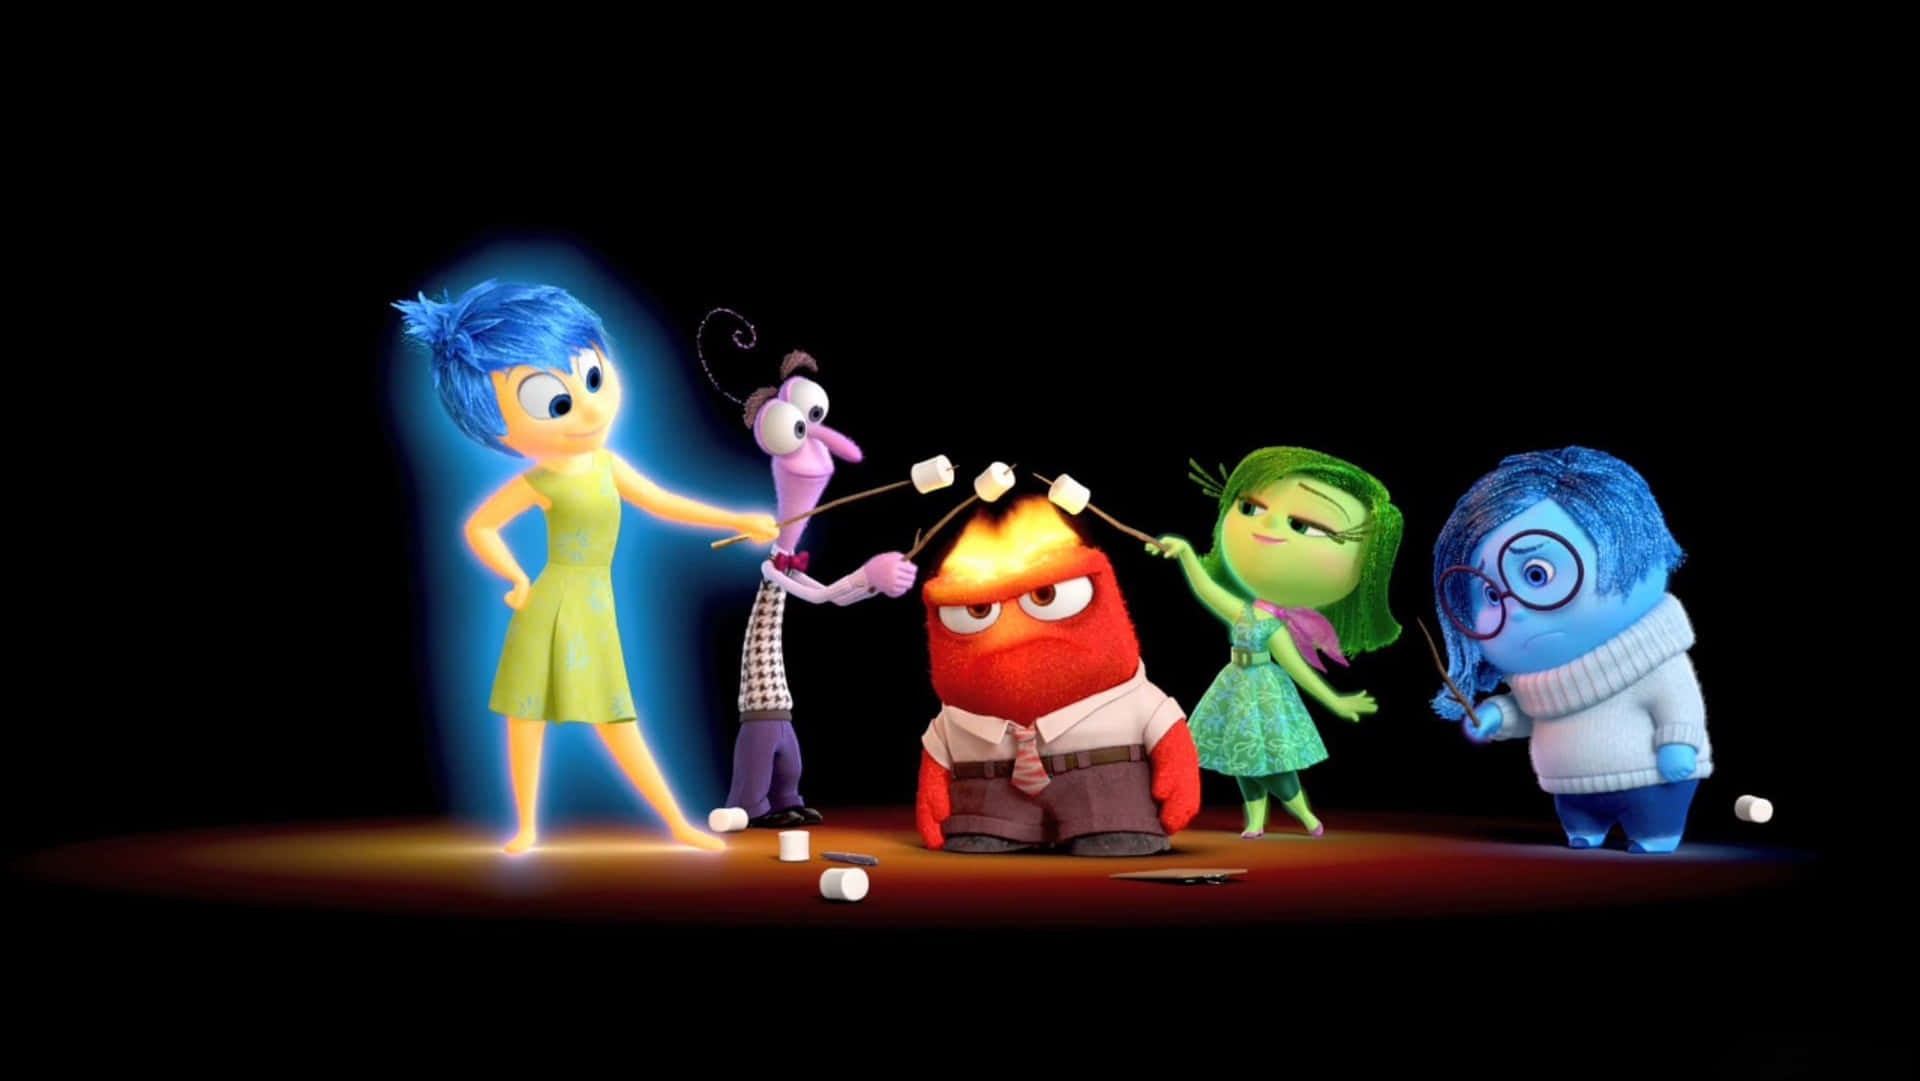 Emotions take center stage in Disney-Pixar's Inside Out